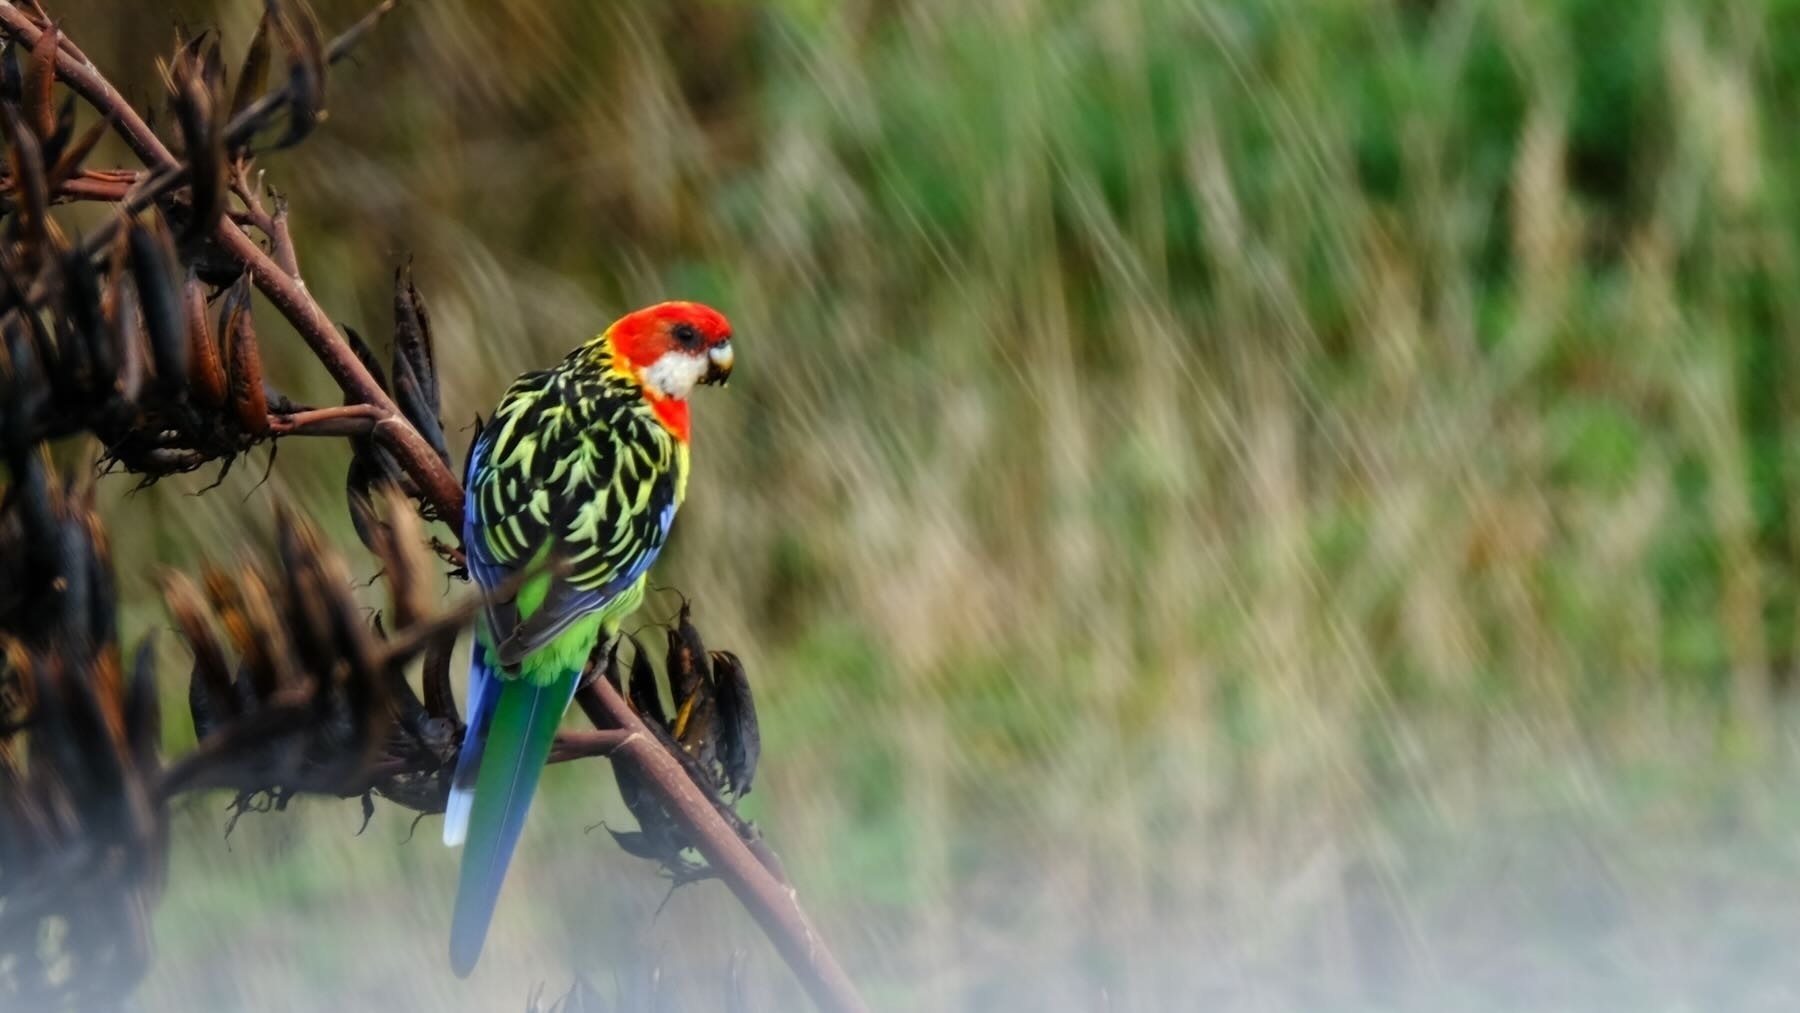 Colourful mid size bird with red head on a flax spear. 